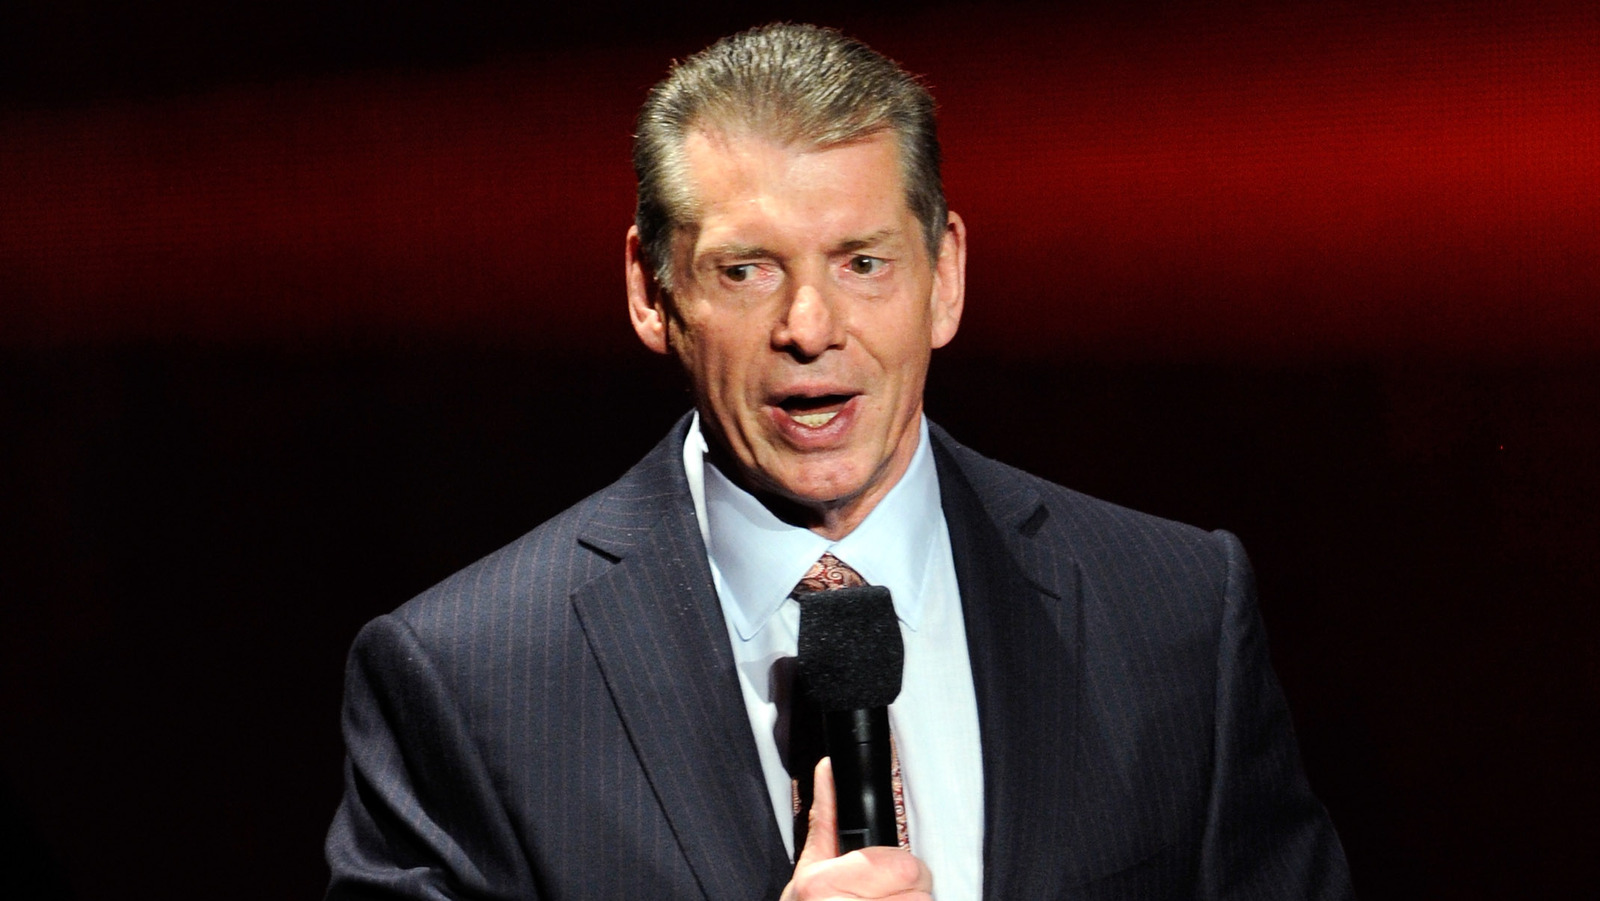 Dave Meltzer's Take On Vince McMahon Being Stripped Of WWE Creative Control